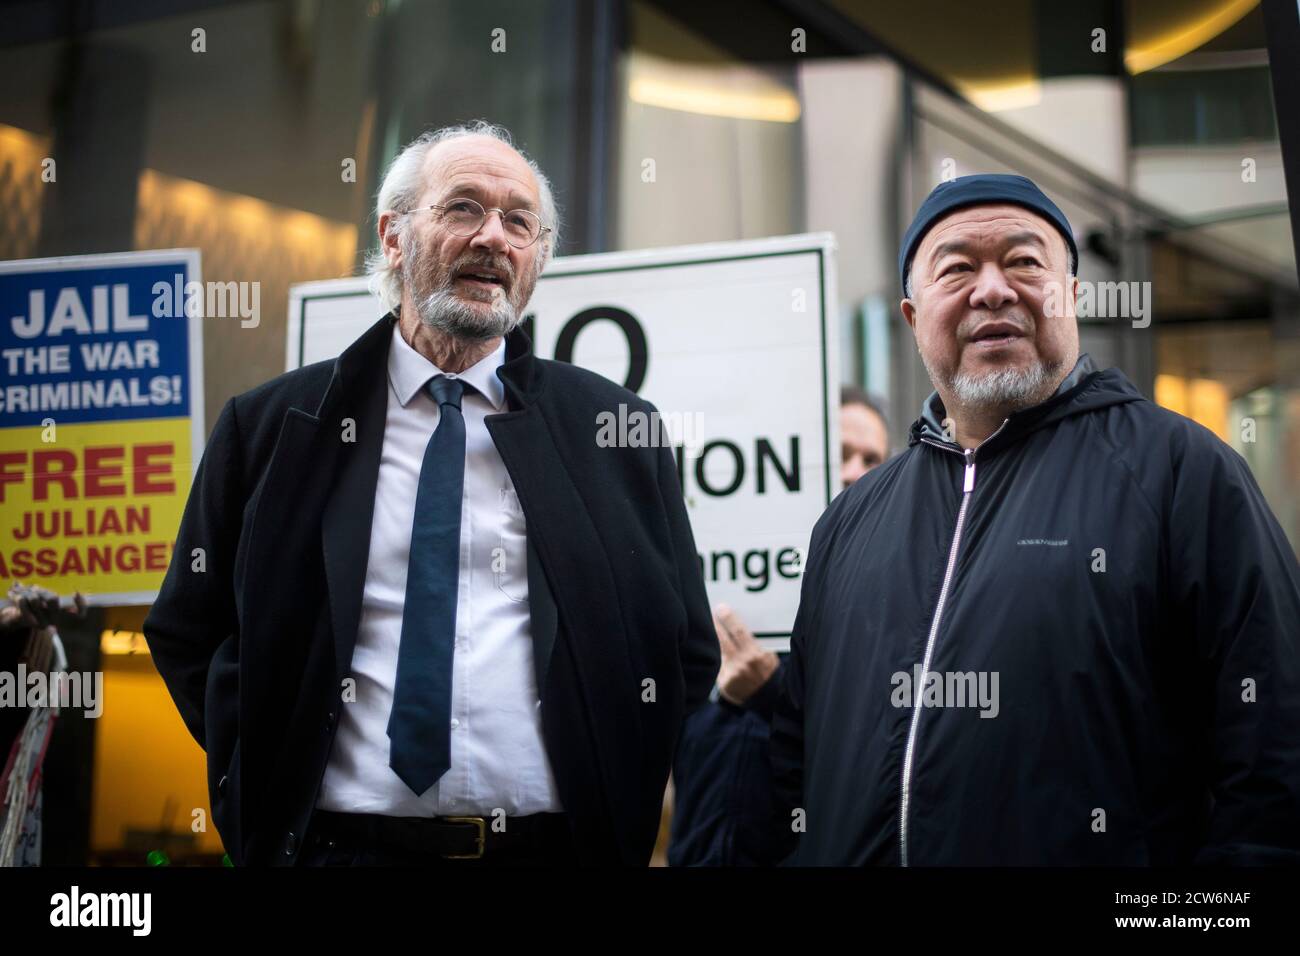 Julian Assange's father John Shipton with Chinese contemporary artist and activist Ai Weiwei after a silent protest outside the Old Bailey in London in support of Julian Assange. The WikiLeaks founder is fighting extradition to the US on charges relating to leaks of classified documents allegedly exposing war crimes and abuse. Stock Photo